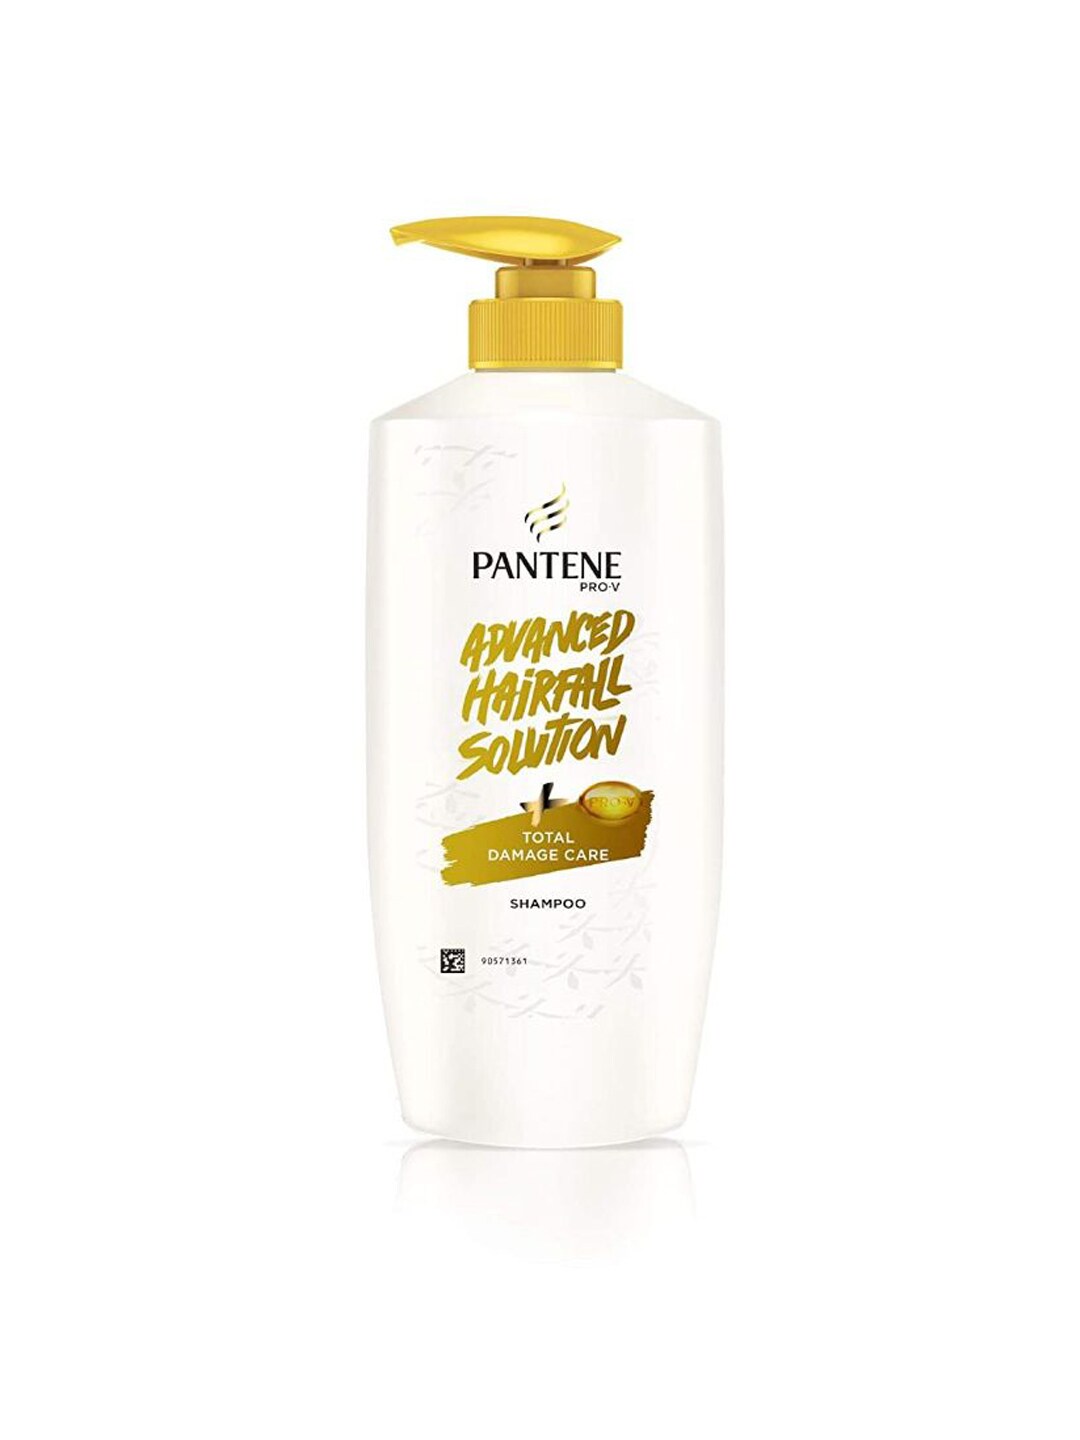 Pantene Unisex Advanced Hairfall Solution Total Damage Care Shampoo 650 ml Price in India